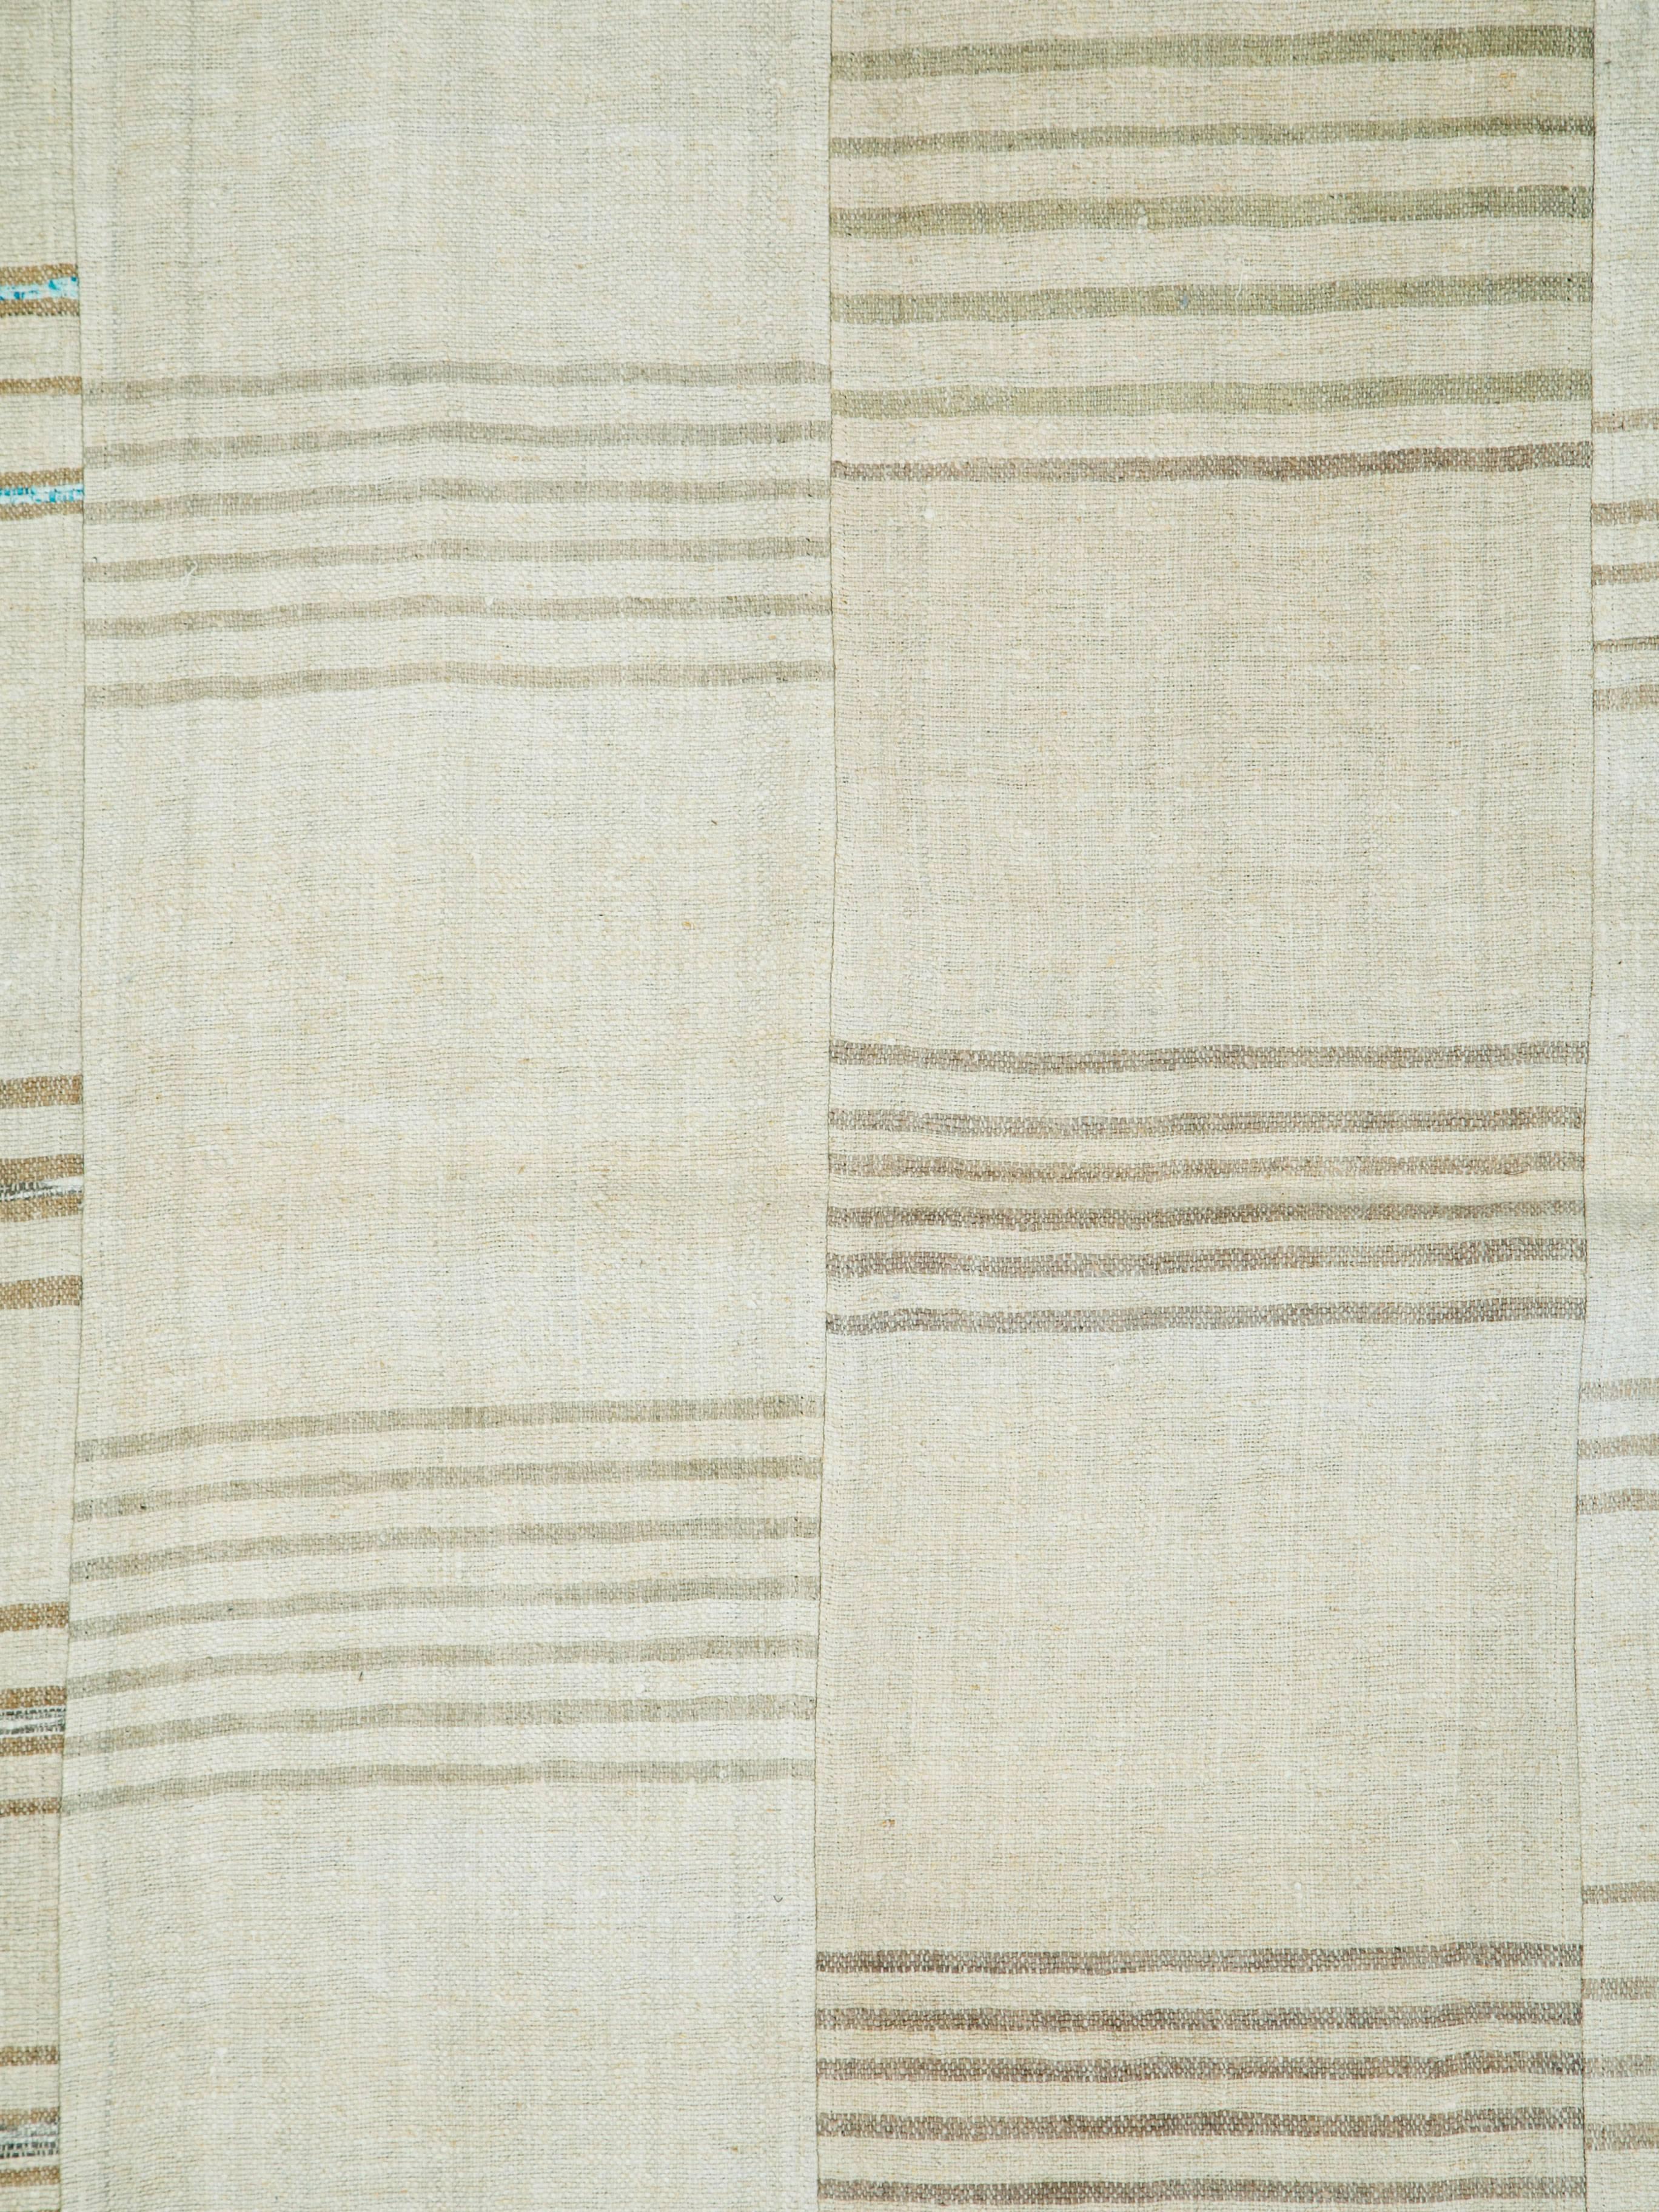 A vintage Turkish flat-woven Kilim from the mid-20th century.